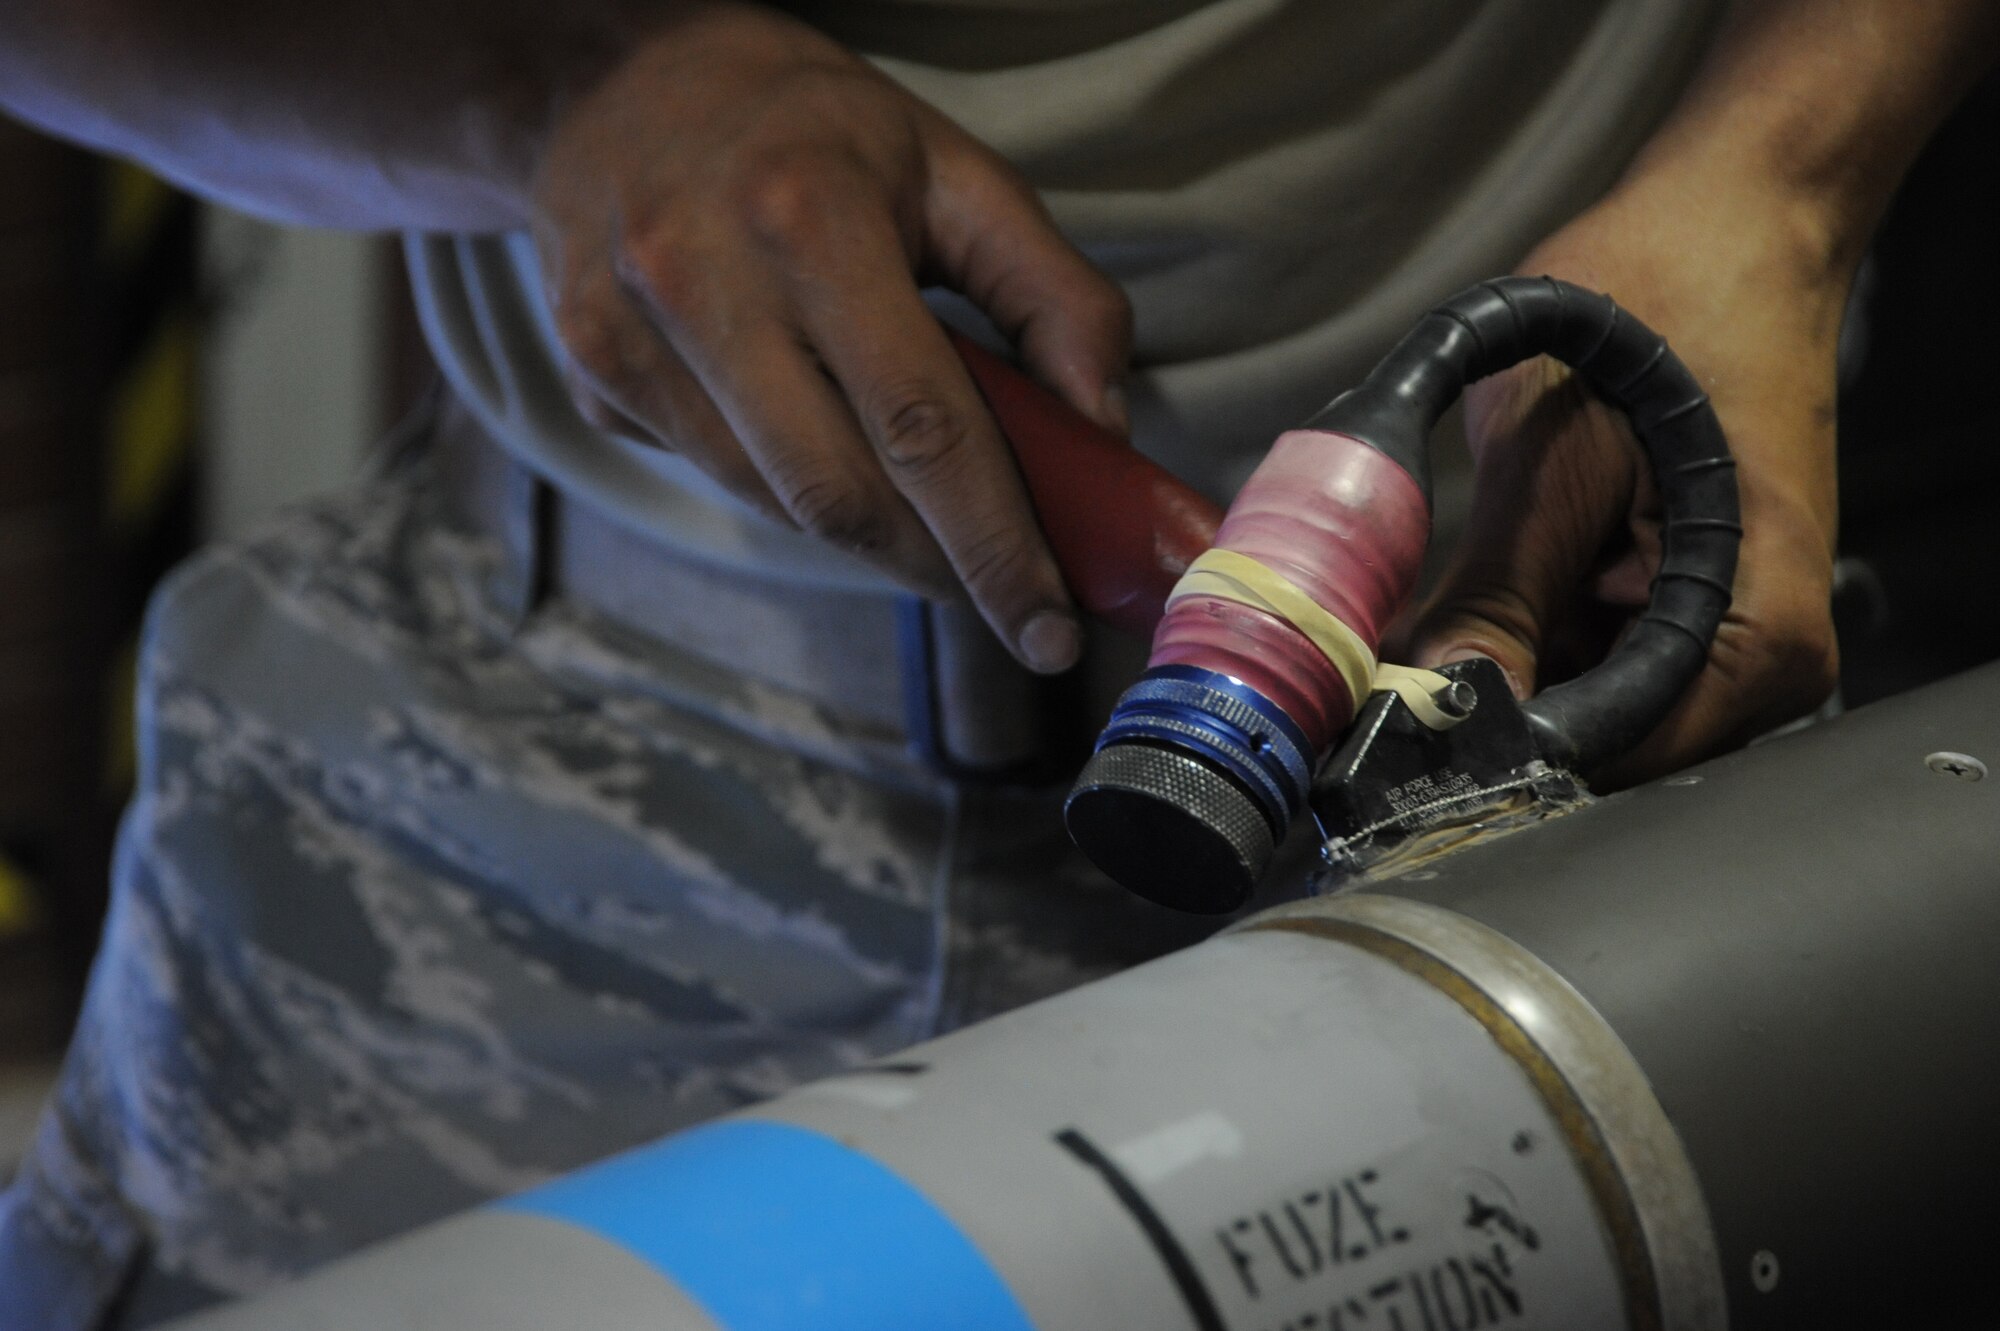 An Airman with the 56th EMS tightens a bolt on a captive air missile. CATM-M9 missiles are one of the many types of precision-guided munitions worked on by weapons maintainers. (U.S. Air Force photo/Airman 1st Class James Hensley)